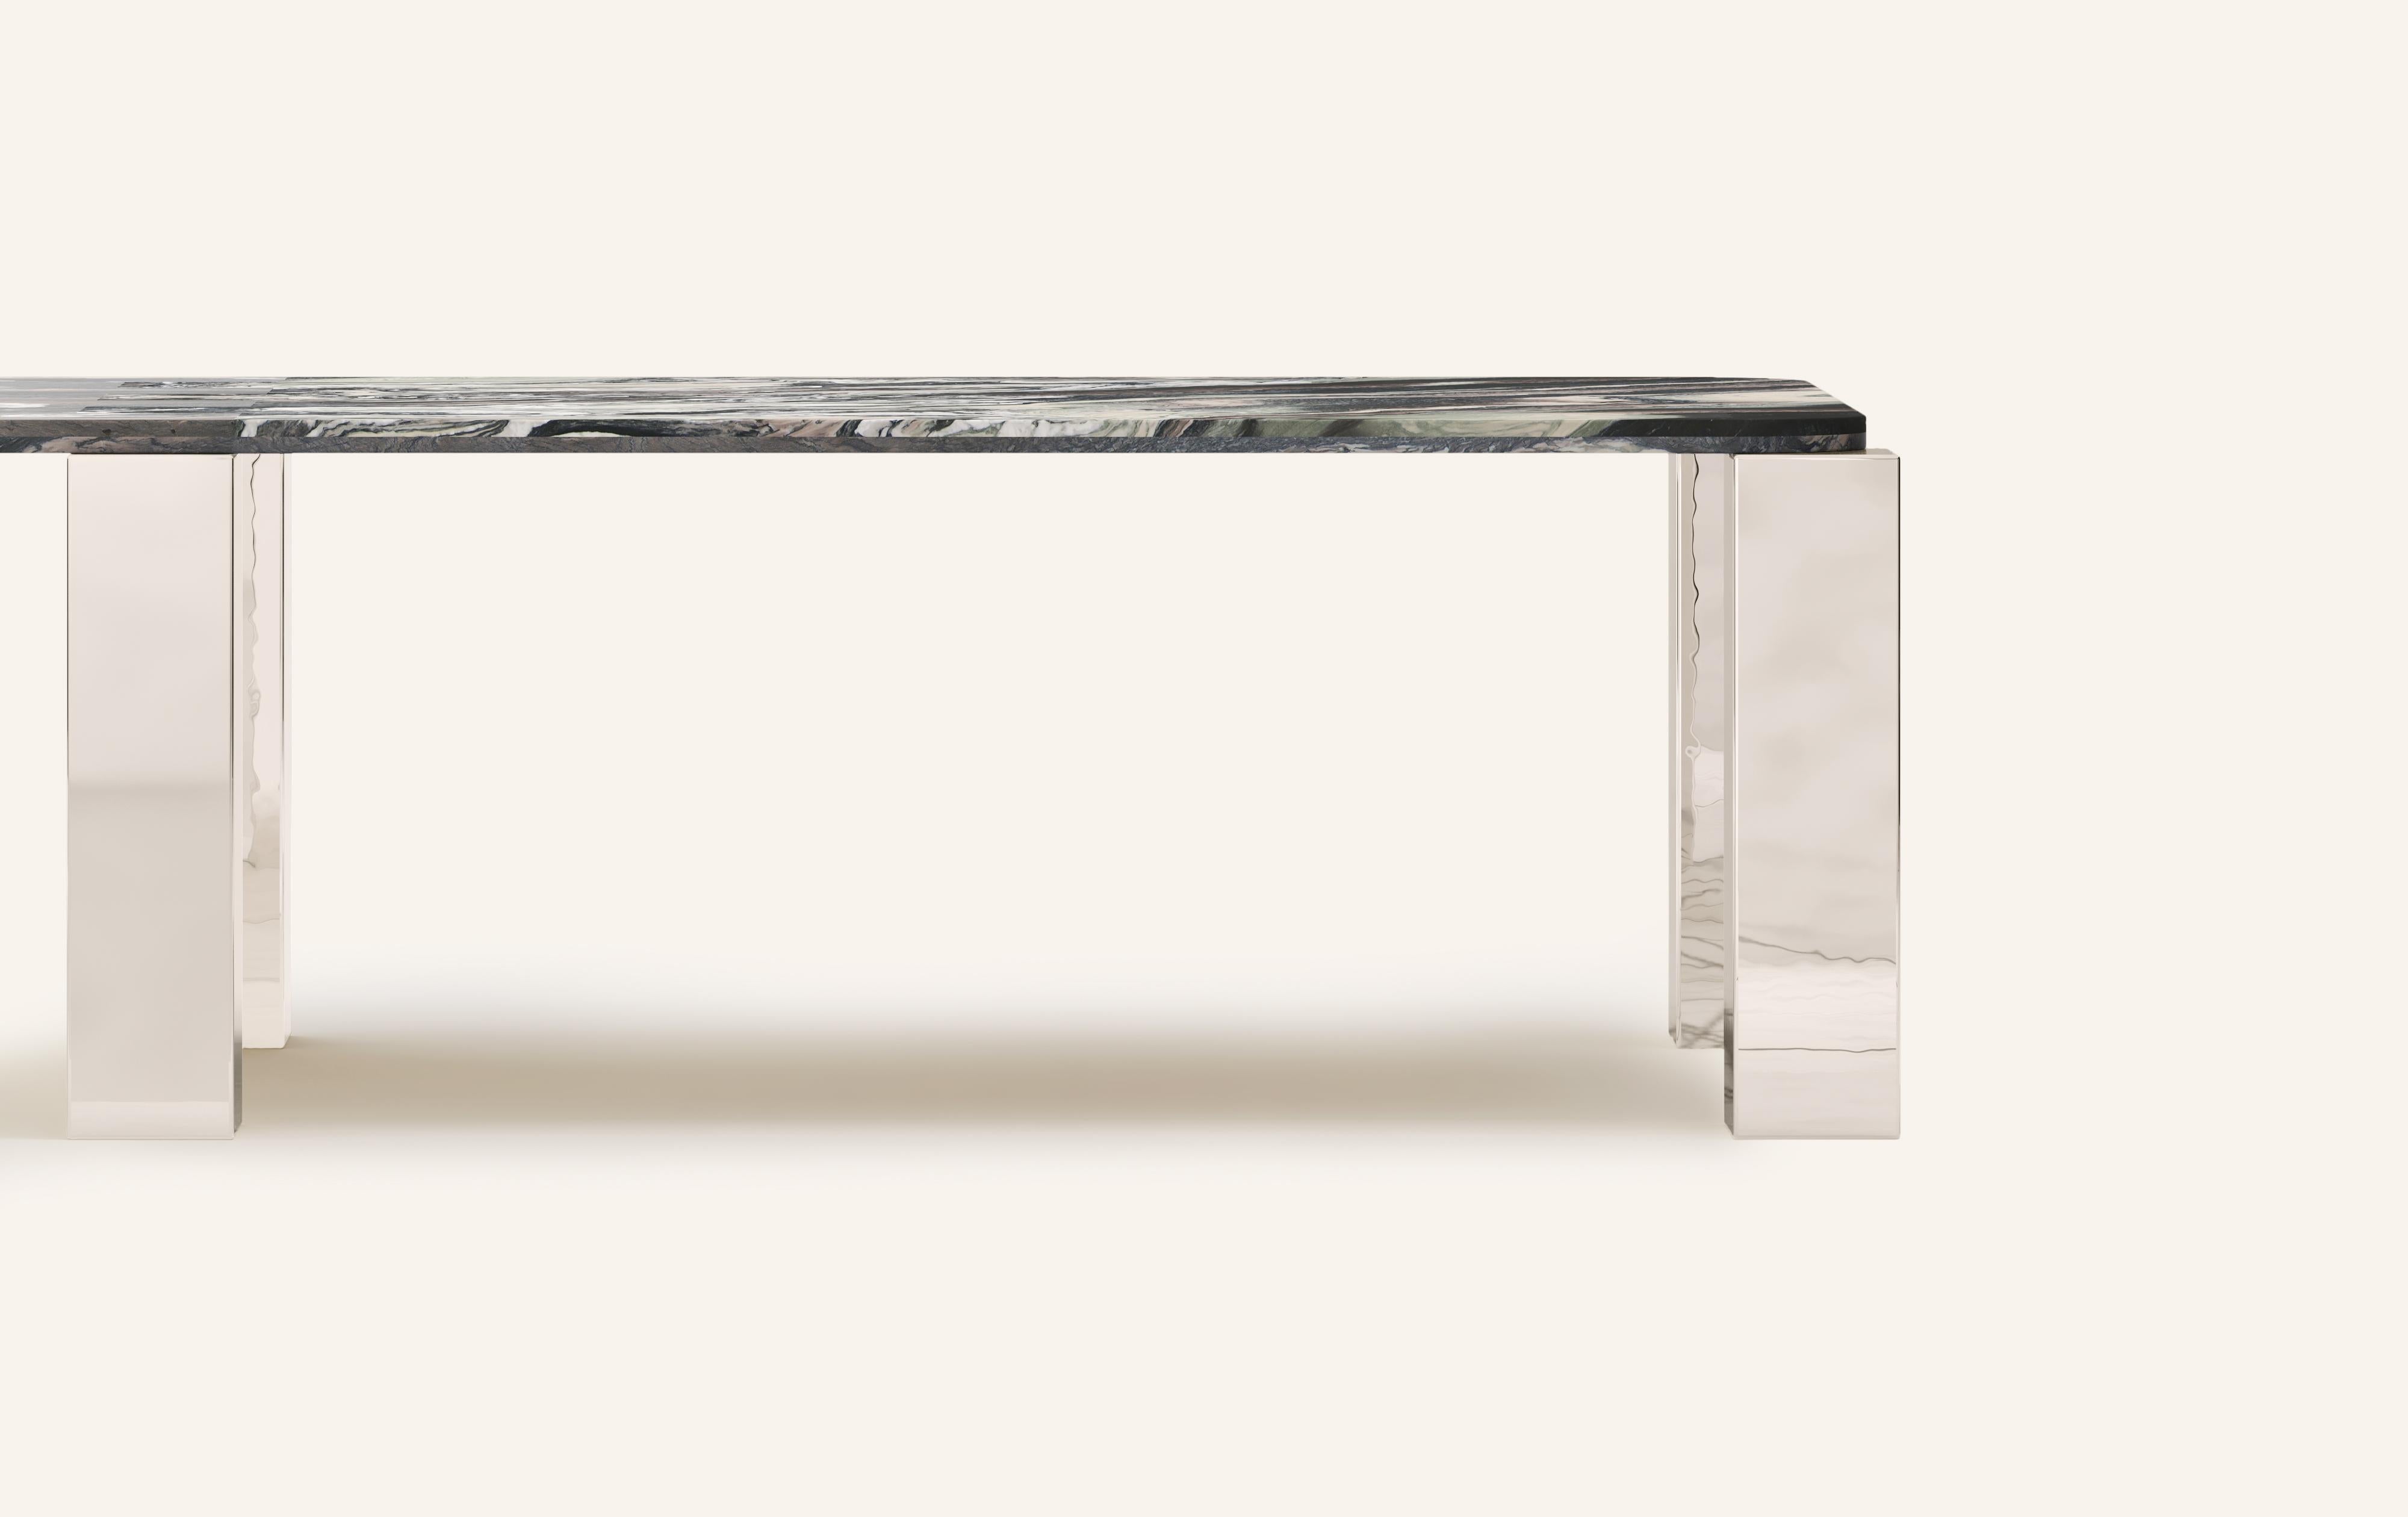 American FORM(LA) Cubo Rectangle Dining Table 146”L x 50”W x 30”H Ondulato Marble/Chrome For Sale